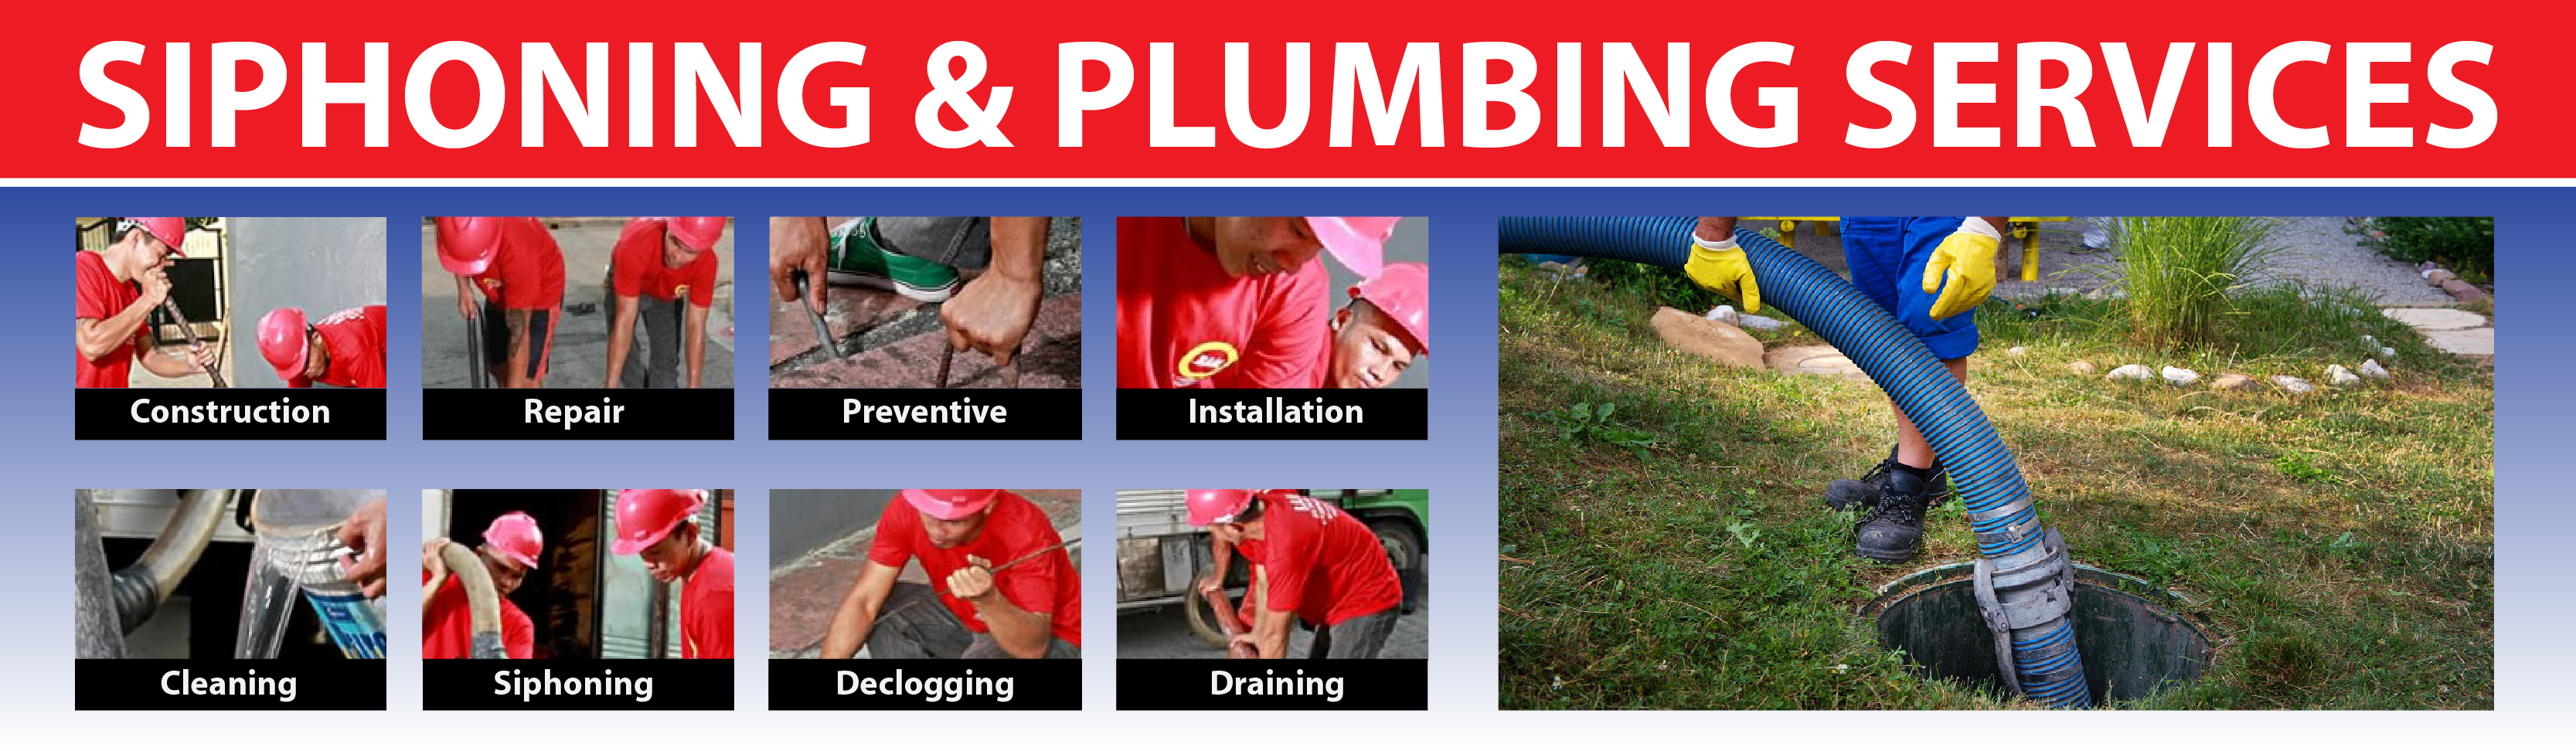 http://www.malabanan-services.com/Siphoning and Plumbing Services